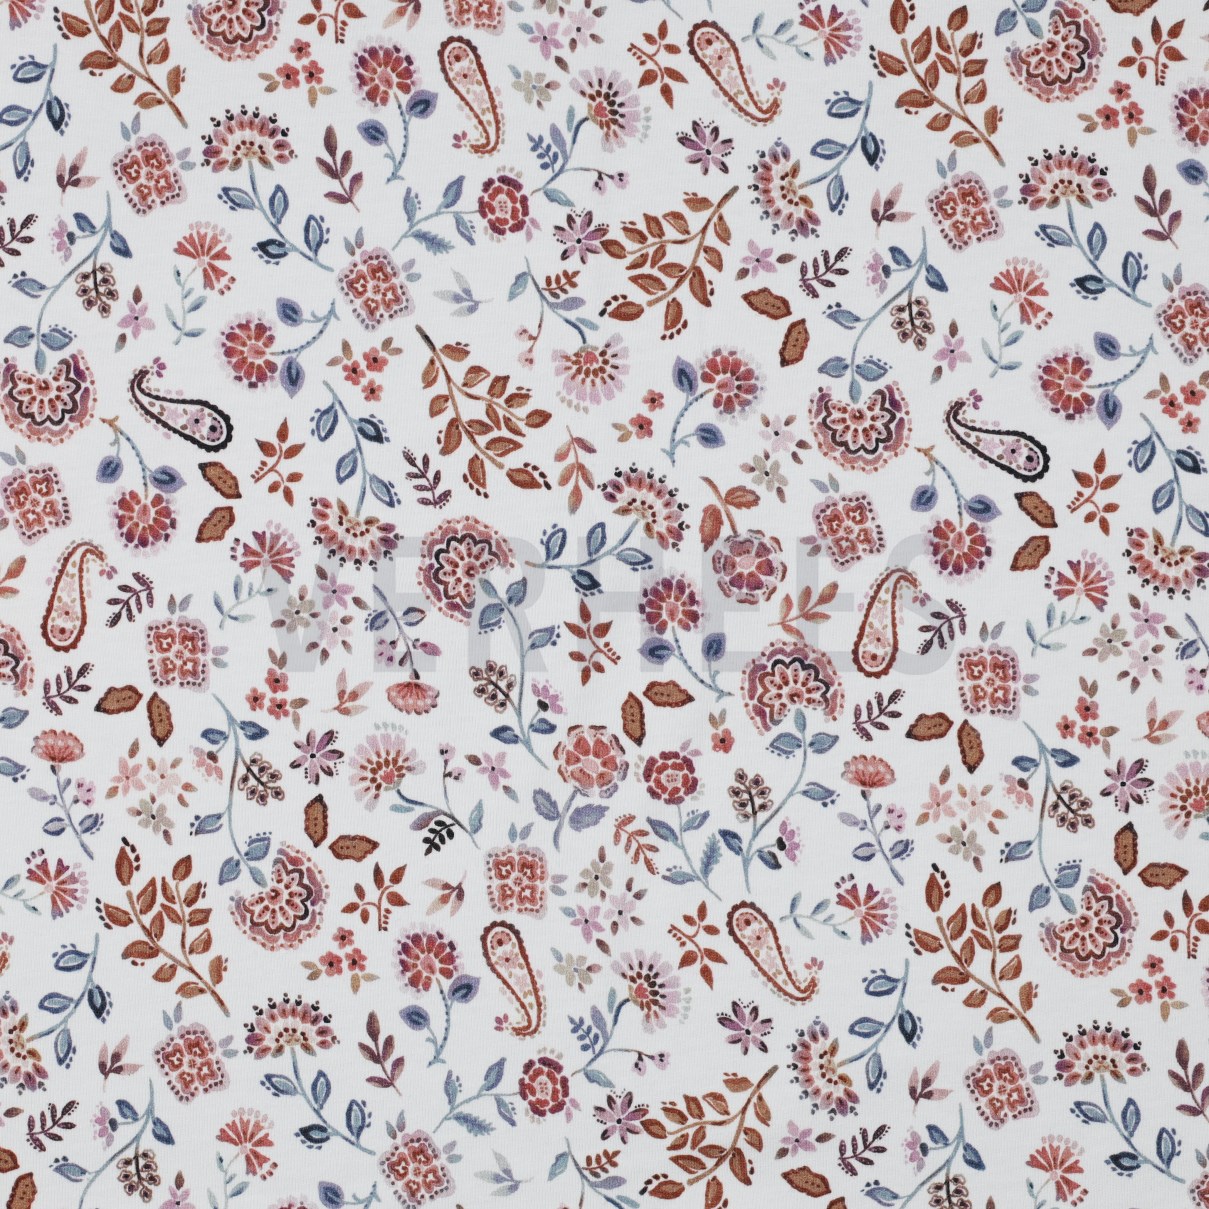 JERSEY DIGITAL PAISLEY FLOWERS WHITE LILAC (high resolution)